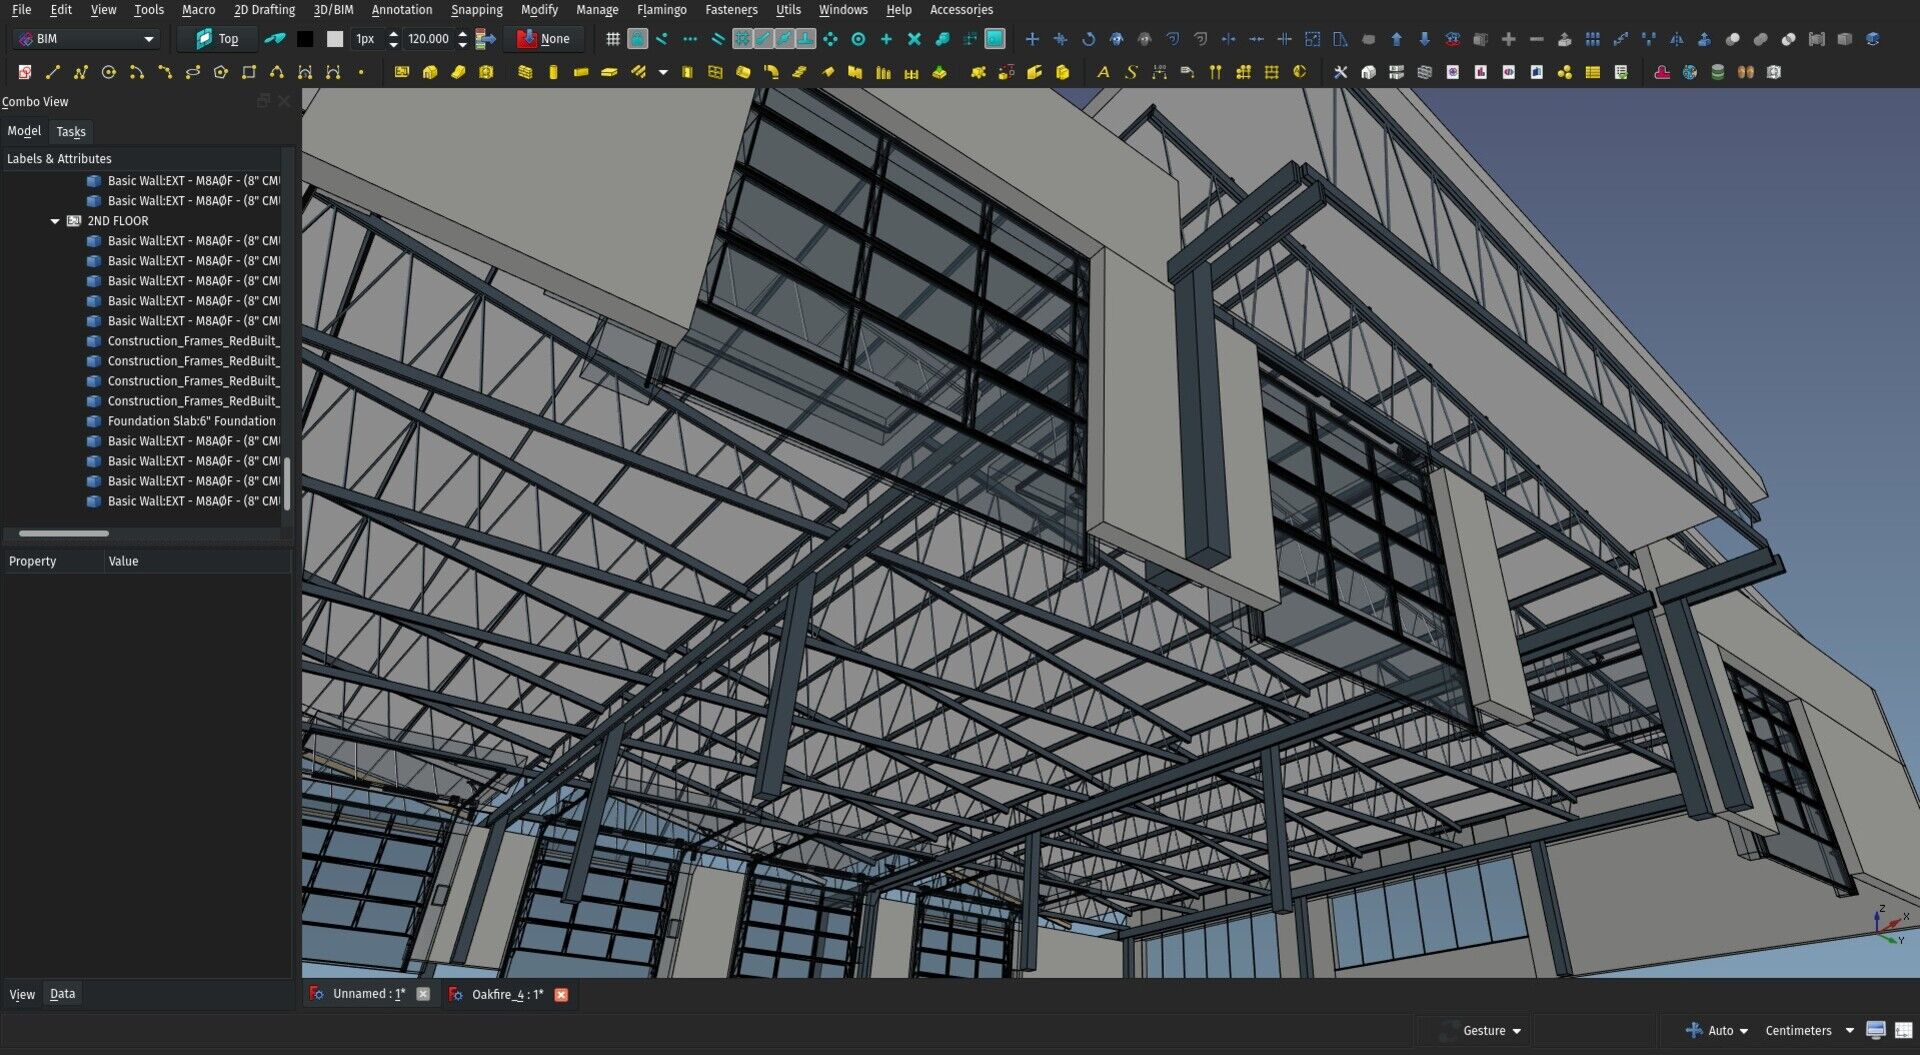 screenshot of the FreeCAD 3D view showing a building being
modelled